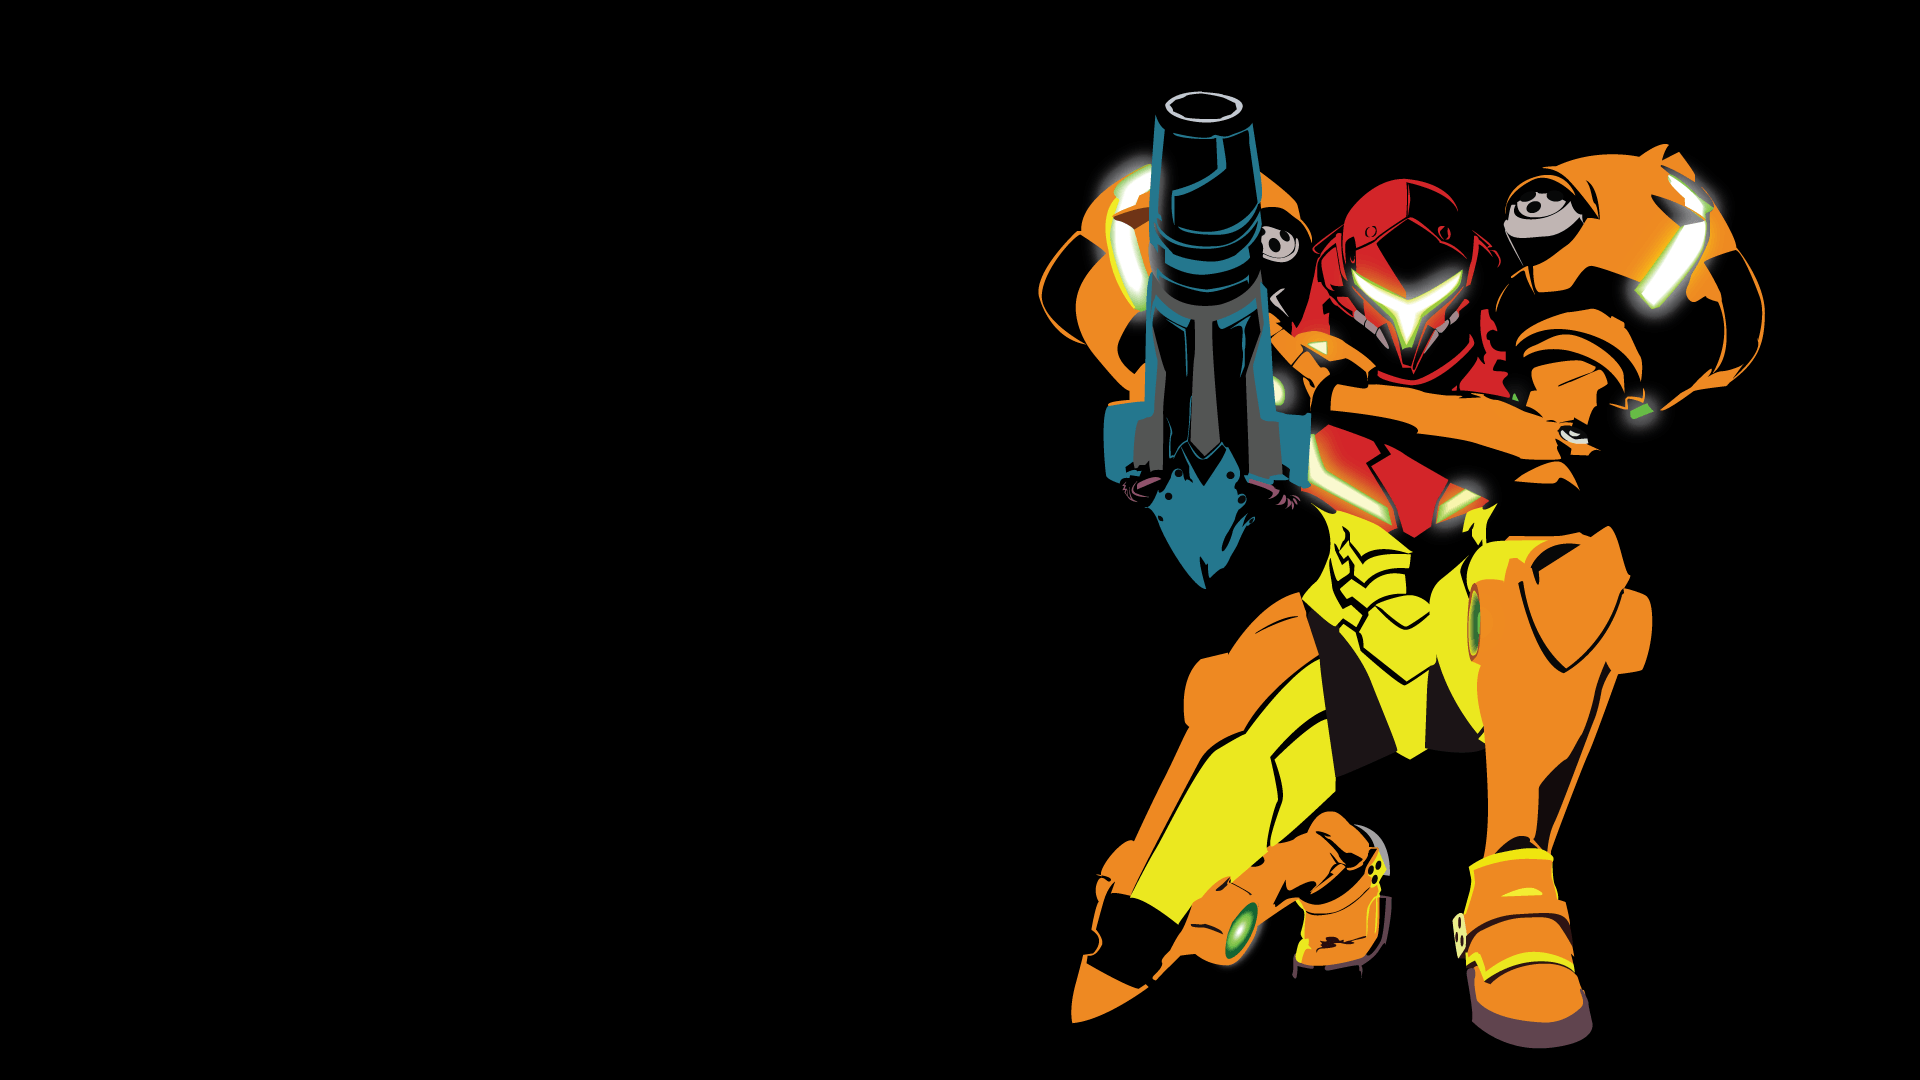 I Made A Vector Minimalist Wallpaper (1920x1080) Of Samus In Her Metroid 2 Pose In Honor Of 100% Completing The Game On Hard Mode. Enjoy!